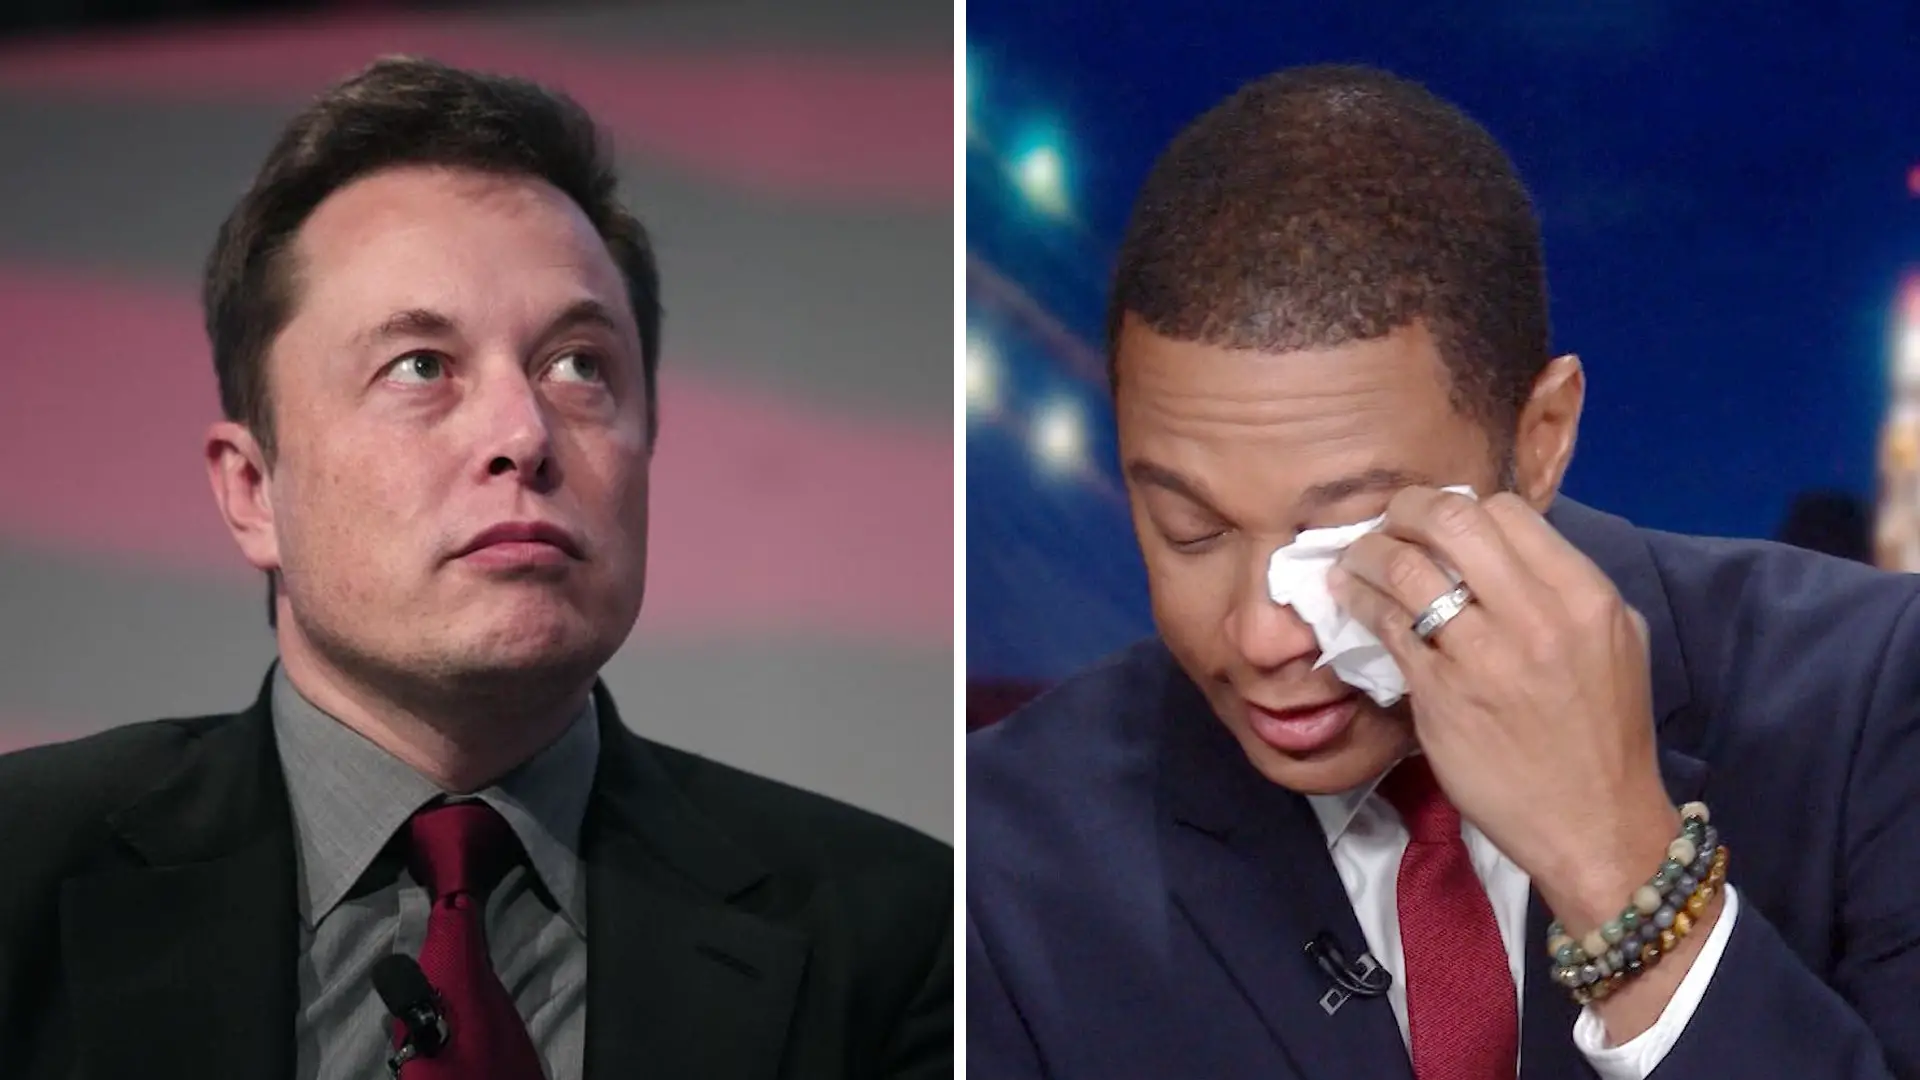 Just in: Elon Musk Punches Don Lemon During CNN Interview